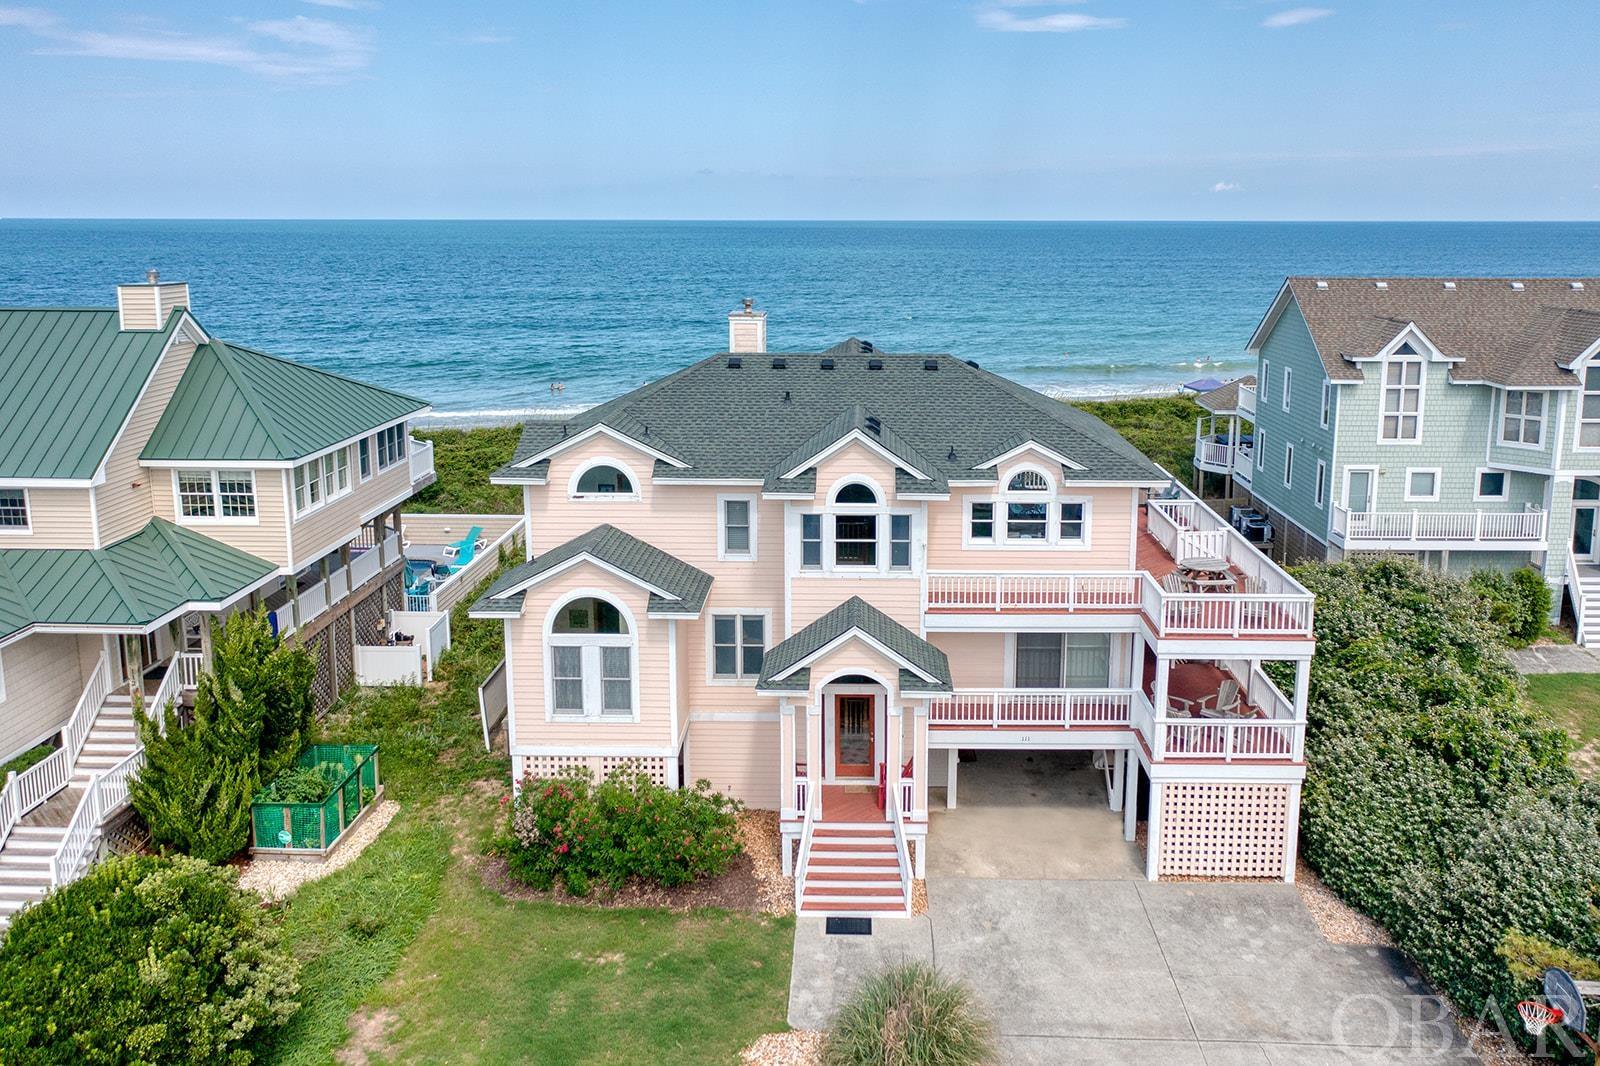 Location WOW factor!  This Duck ocean front is South of the pier with a mature, stable and massive protective dune.  No beach nourishments have been needed for this section of the coastline.  Located near and between the town of Duck and the "Avenues" of Rt 12, the location is ideal and highly sought after!  The community will impress and so will the home!  The cul-de-sac location adds to the privacy of the street only servicing this community.  The ROI with approximately $240,000 rental income for 2023 is impressive and has more growth opportunity with your personal touches.  Close quickly and reap the significant income remaining for this season (at time of Listing $111,700) for an immediate return on your investment!  Beautifully landscaped with a huge oceanside pool, dune-top deck overlooking the beach and a hot tub makes for "choices, choices, choices," on where to relax next.  Enjoy nature with your morning coffee watching dolphins, pelicans and even deer!  When taking pictures, we saw a fawn and her mother in the dune thicket enjoying lunch and providing a little landscaping assistance (see pic #8).  The mature dune and solid pool fence have prevented sand drifting into the pool area which is a on-going maintenance problem with some other homes.  Expansive sun and covered decks with views, views views!  Every bedroom exits to a deck or patio.  The ocean views from inside the house are expansive.  You must see this home to imagine all the possibilities.